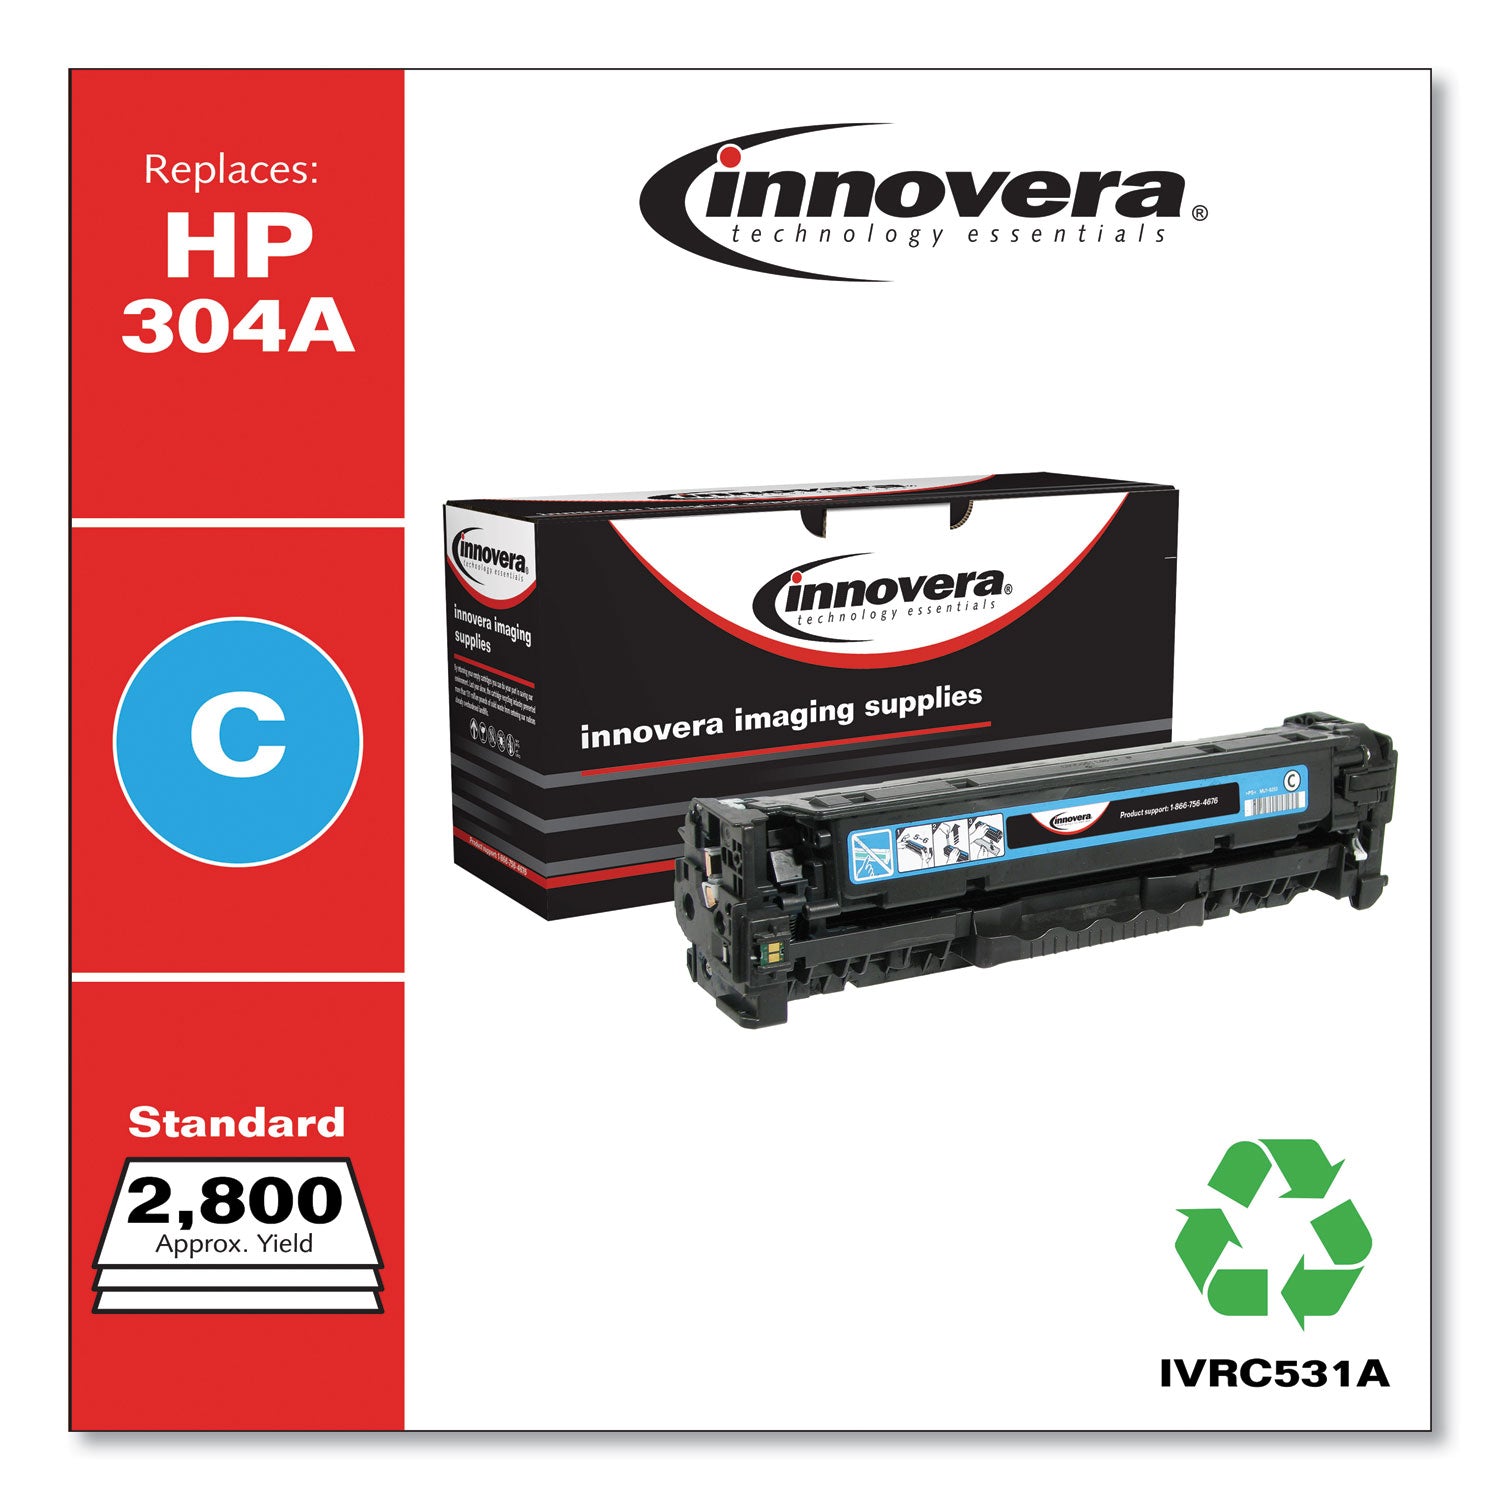 Remanufactured Cyan Toner, Replacement for 304A (CC531A), 2,800 Page-Yield - 